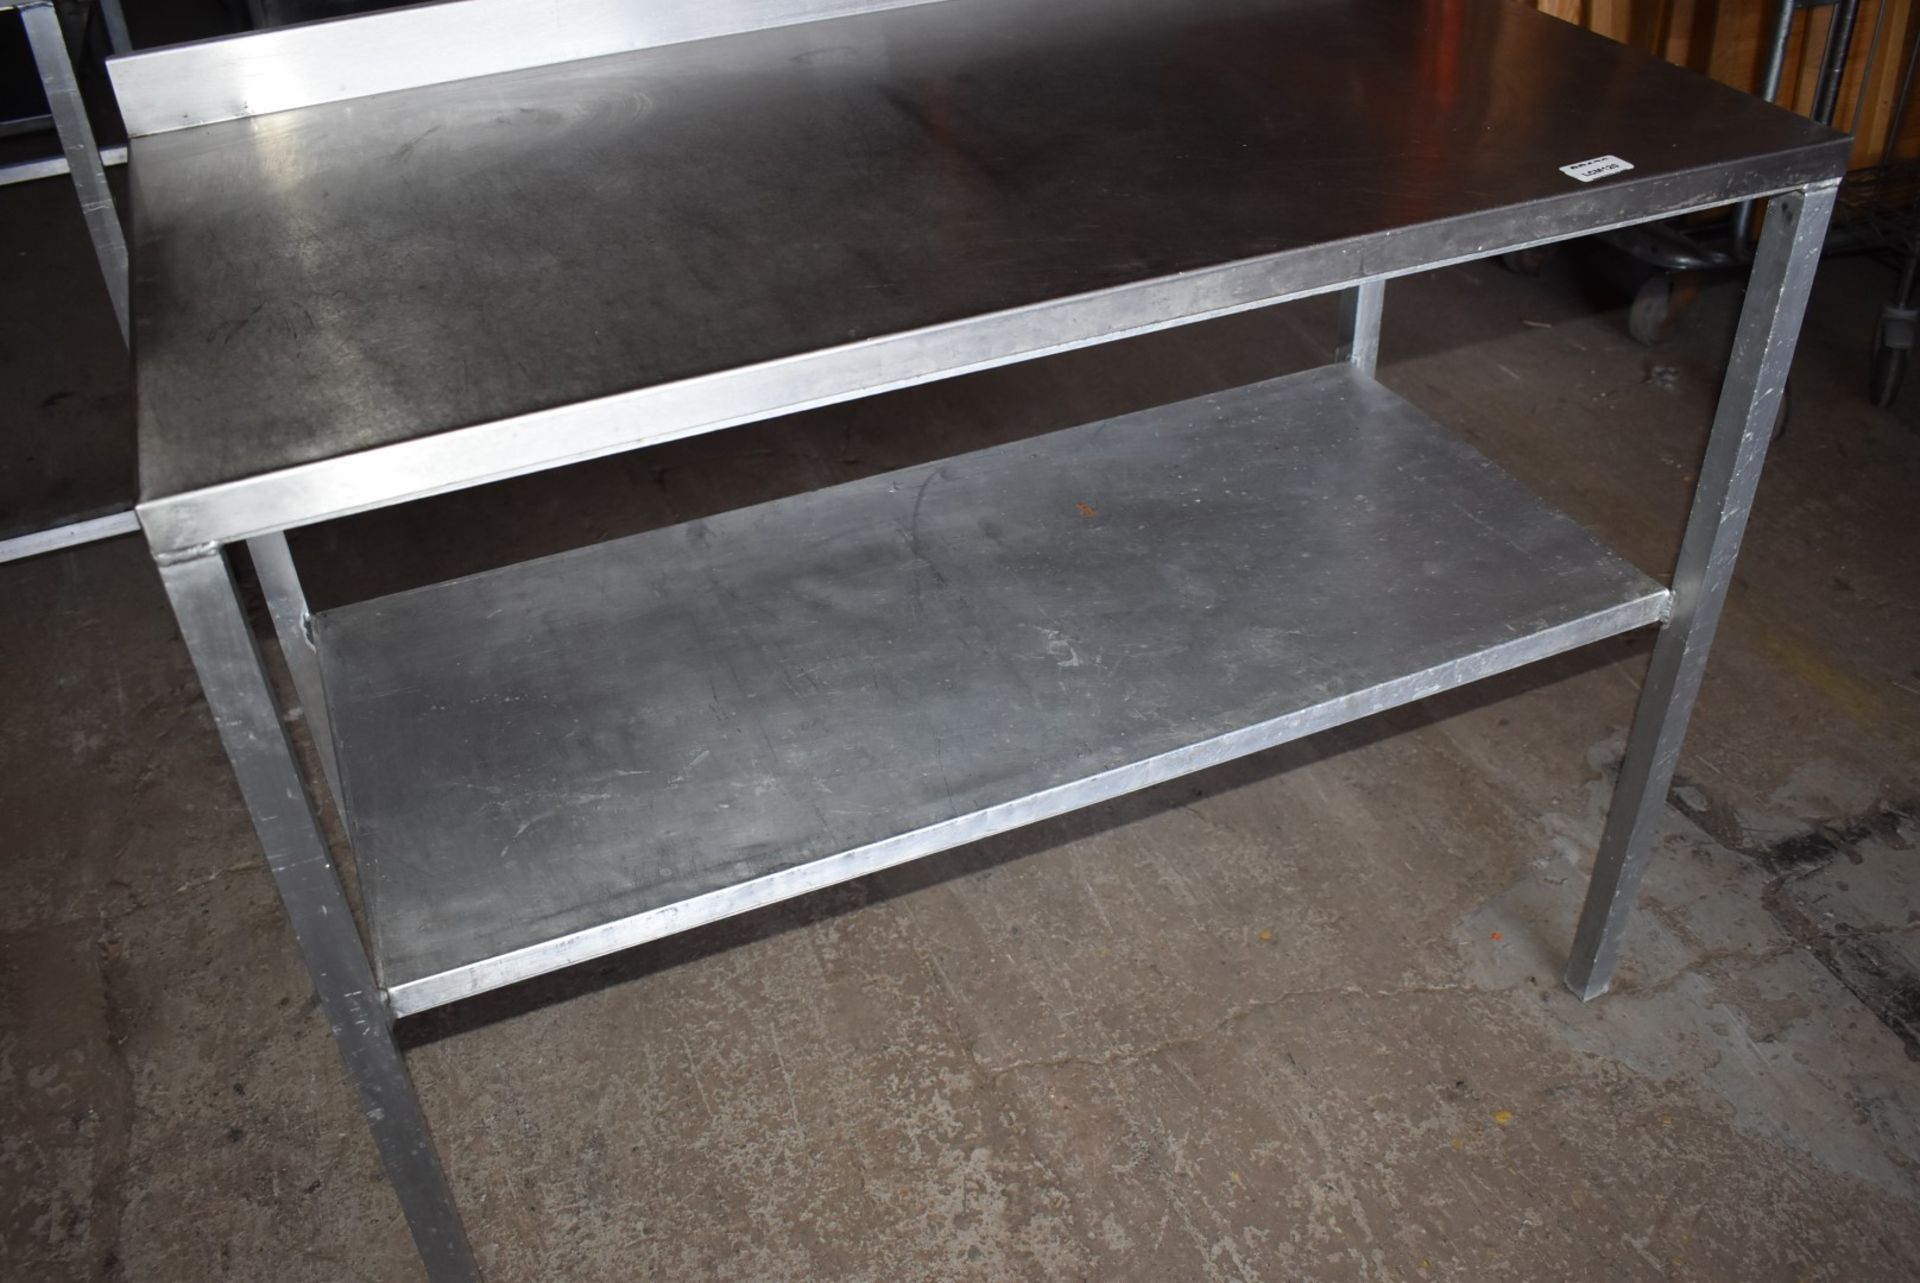 1 x Stainless Steel Prep Table With Upstand and Undershelf - H92 x W115 x D65 cms - Dimensions: - Image 3 of 8